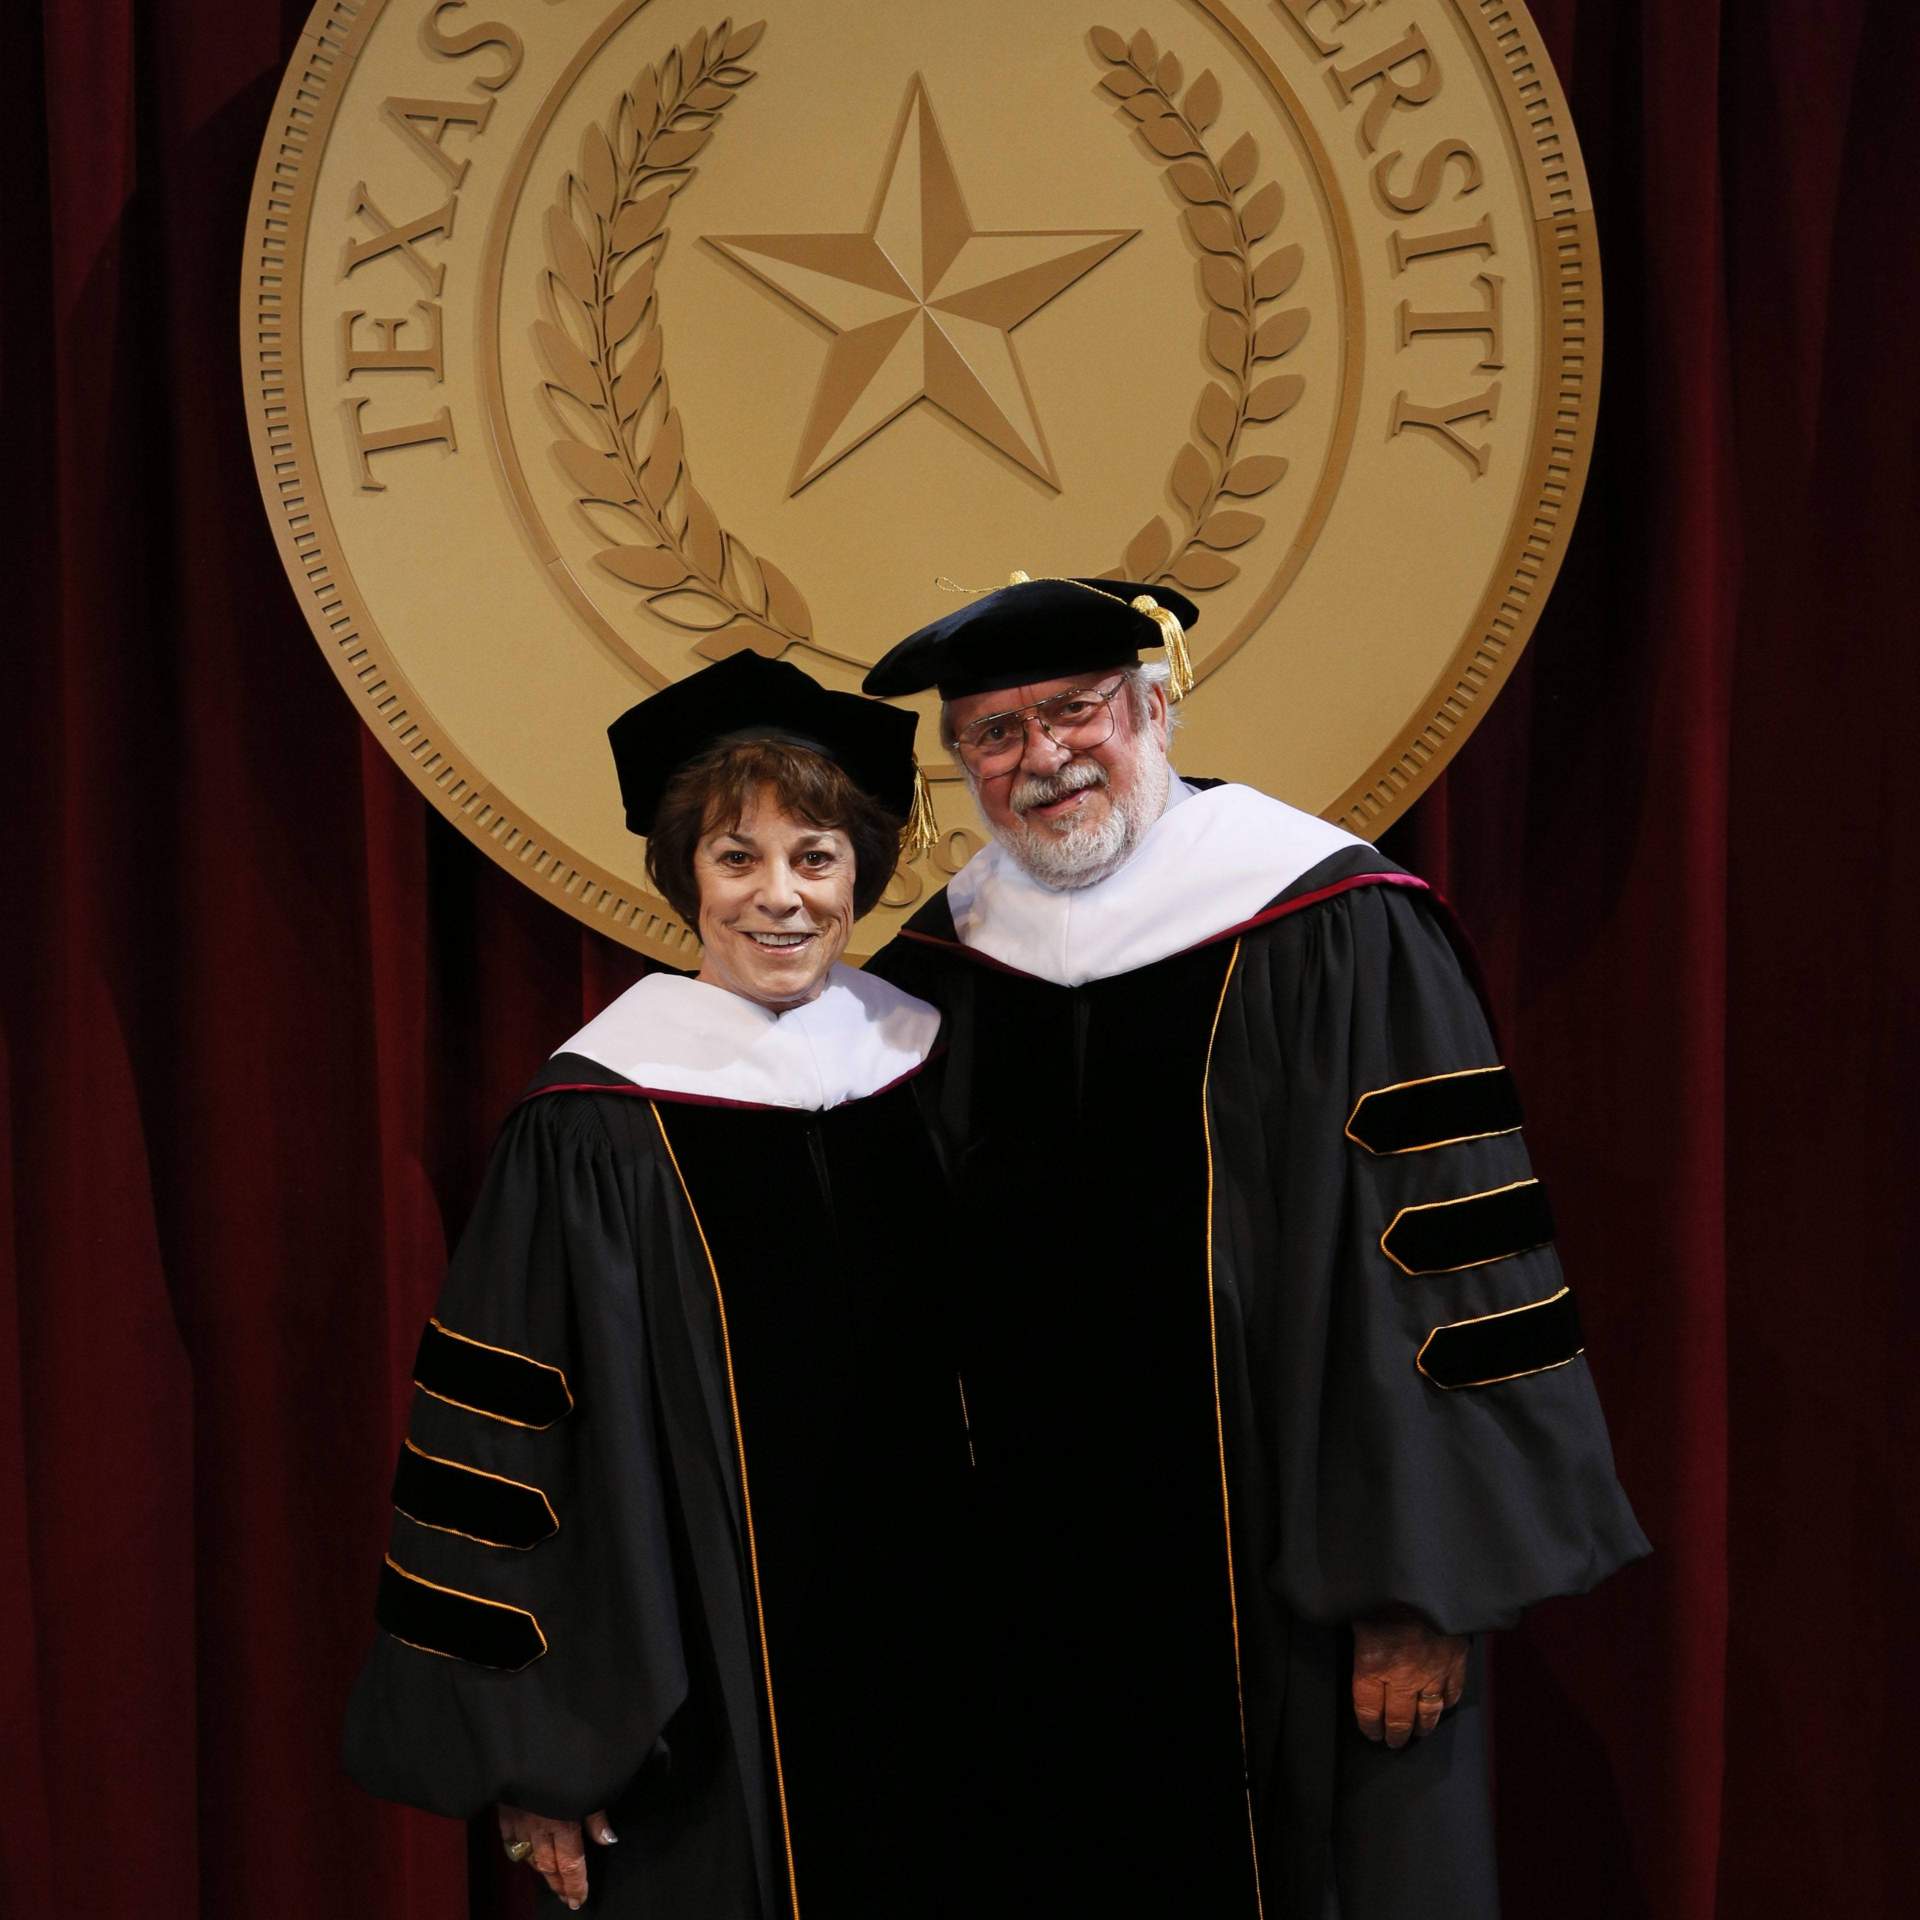 Sally and William Wittliff presented honorary doctoral degrees